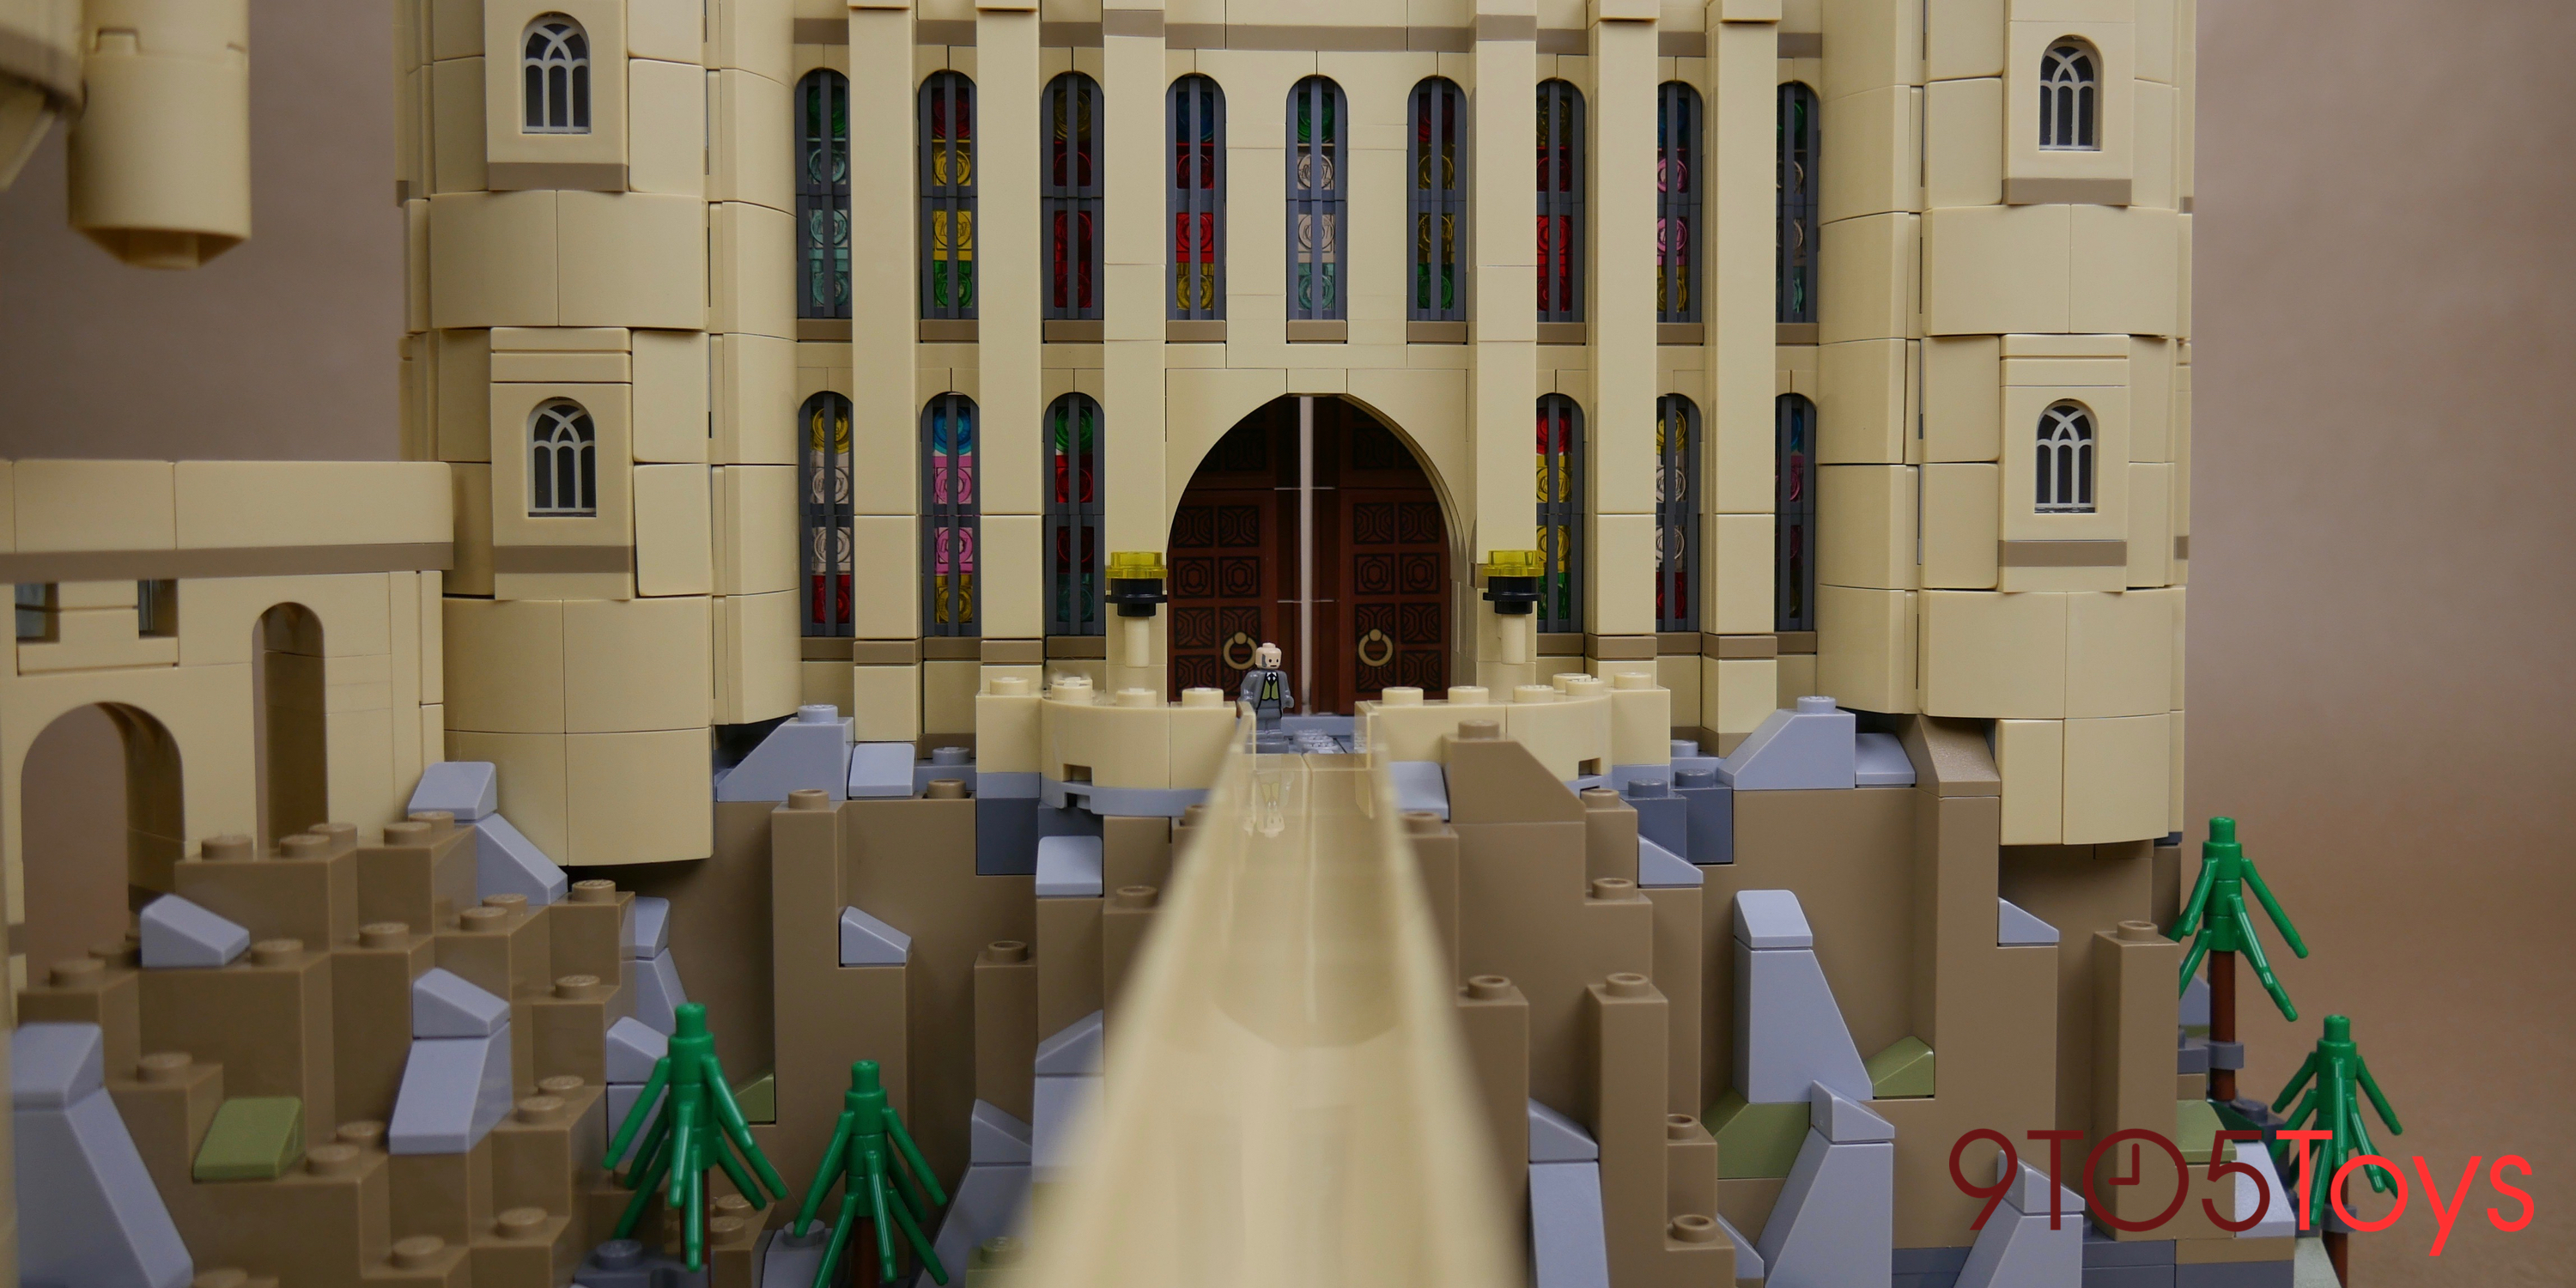 LEGO Hogwarts Castle Review: The 2nd largest kit in history reigns supreme  over all